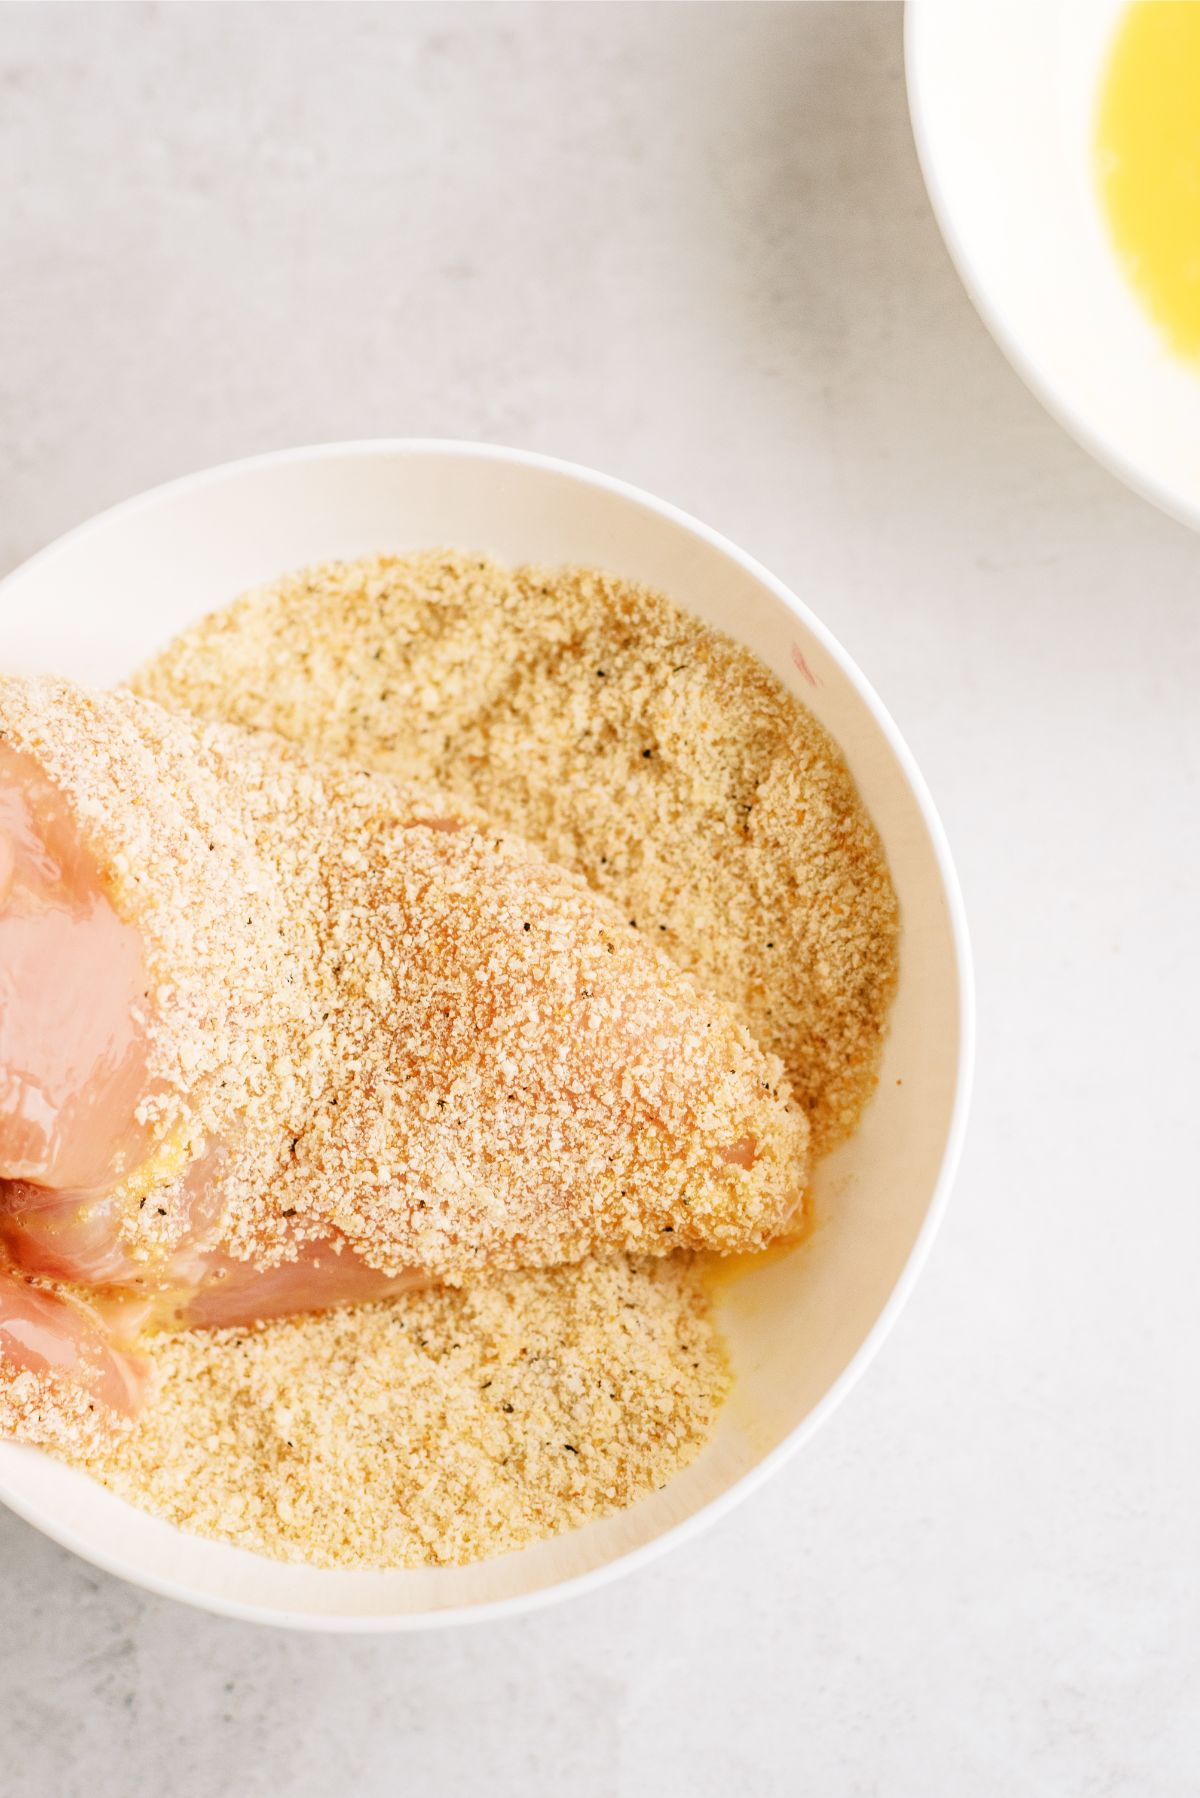 Chicken breast dredged in bread crumbs